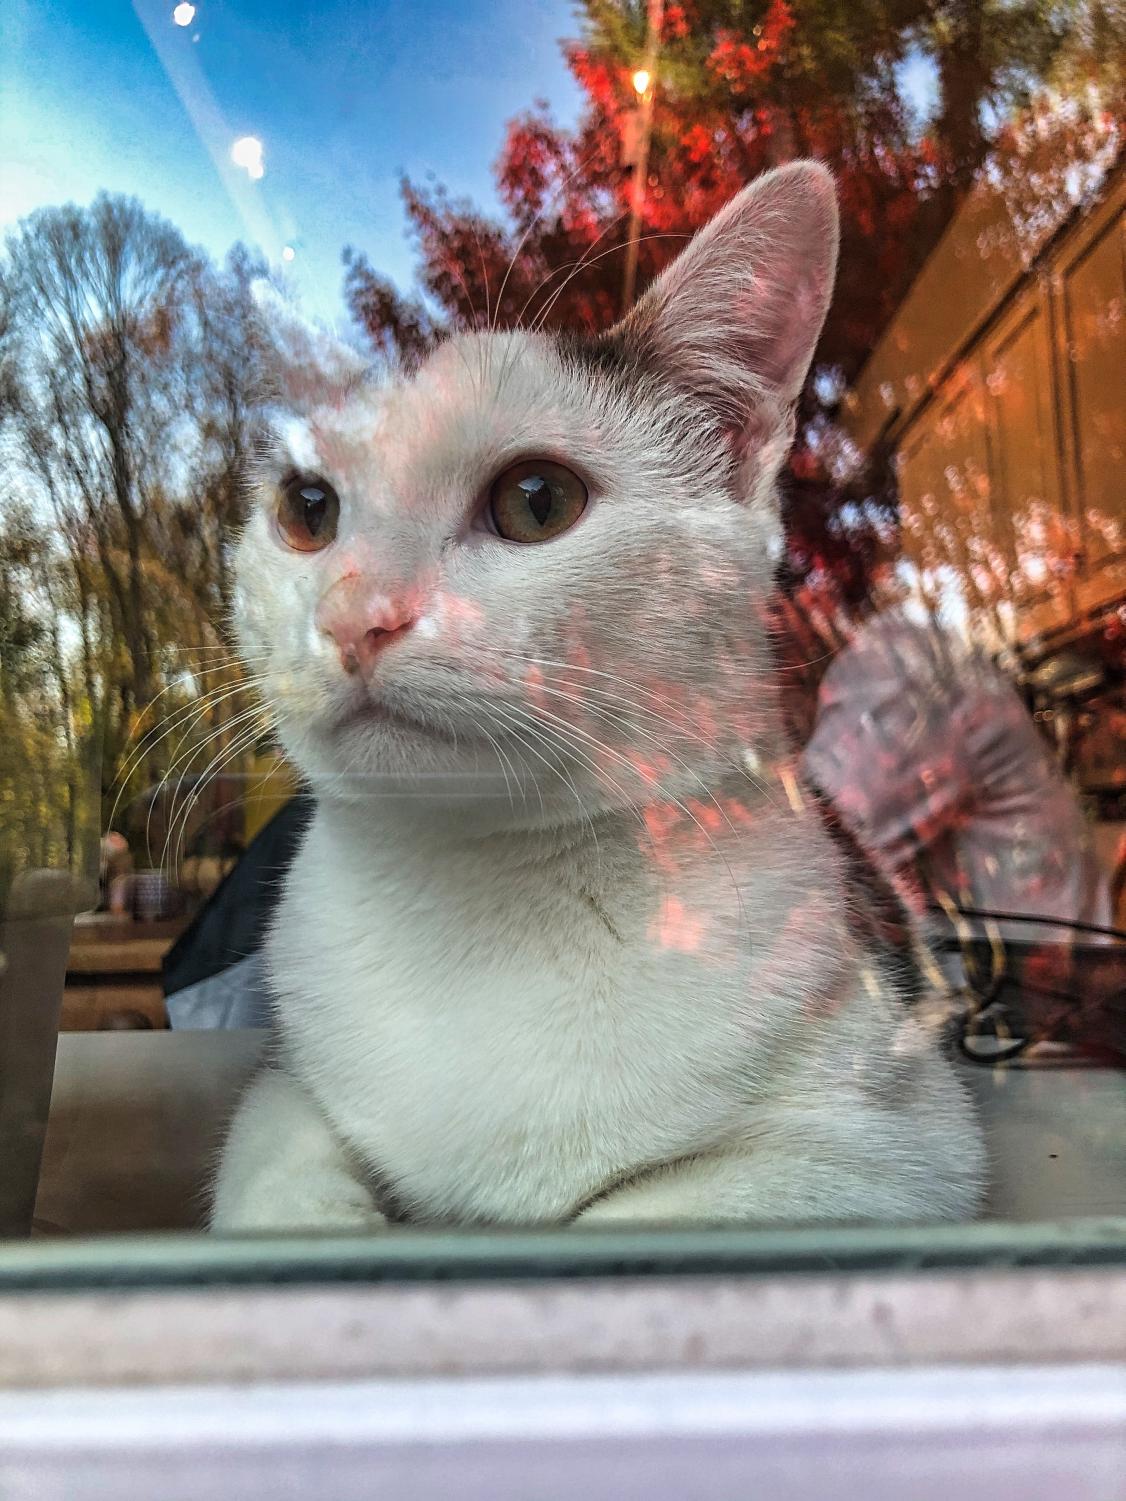 Cat looks out window